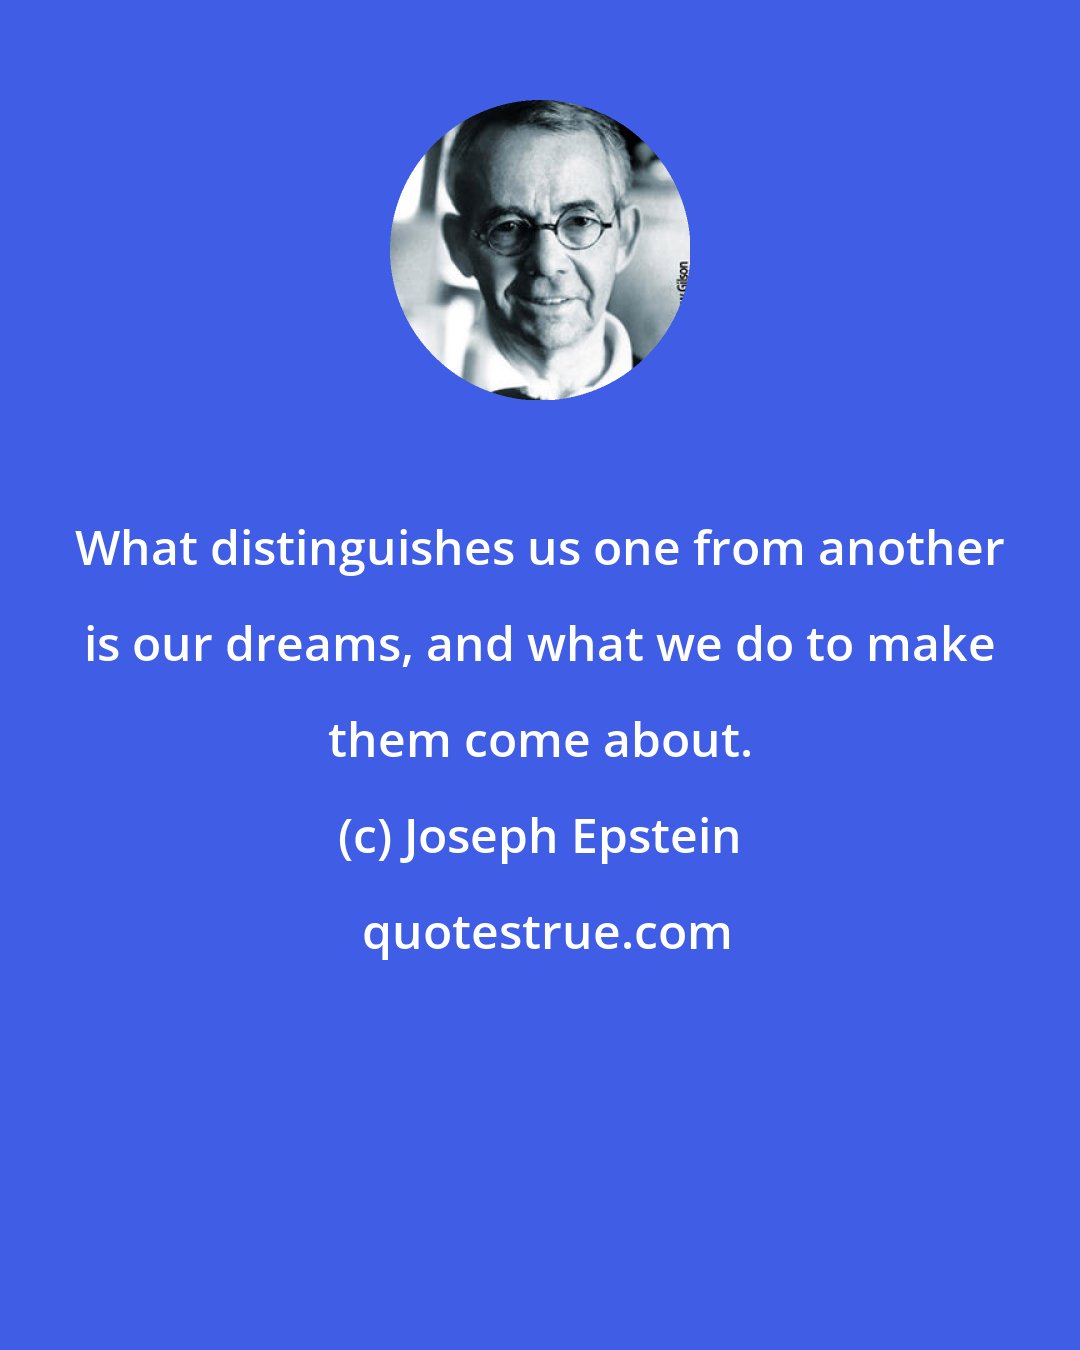 Joseph Epstein: What distinguishes us one from another is our dreams, and what we do to make them come about.